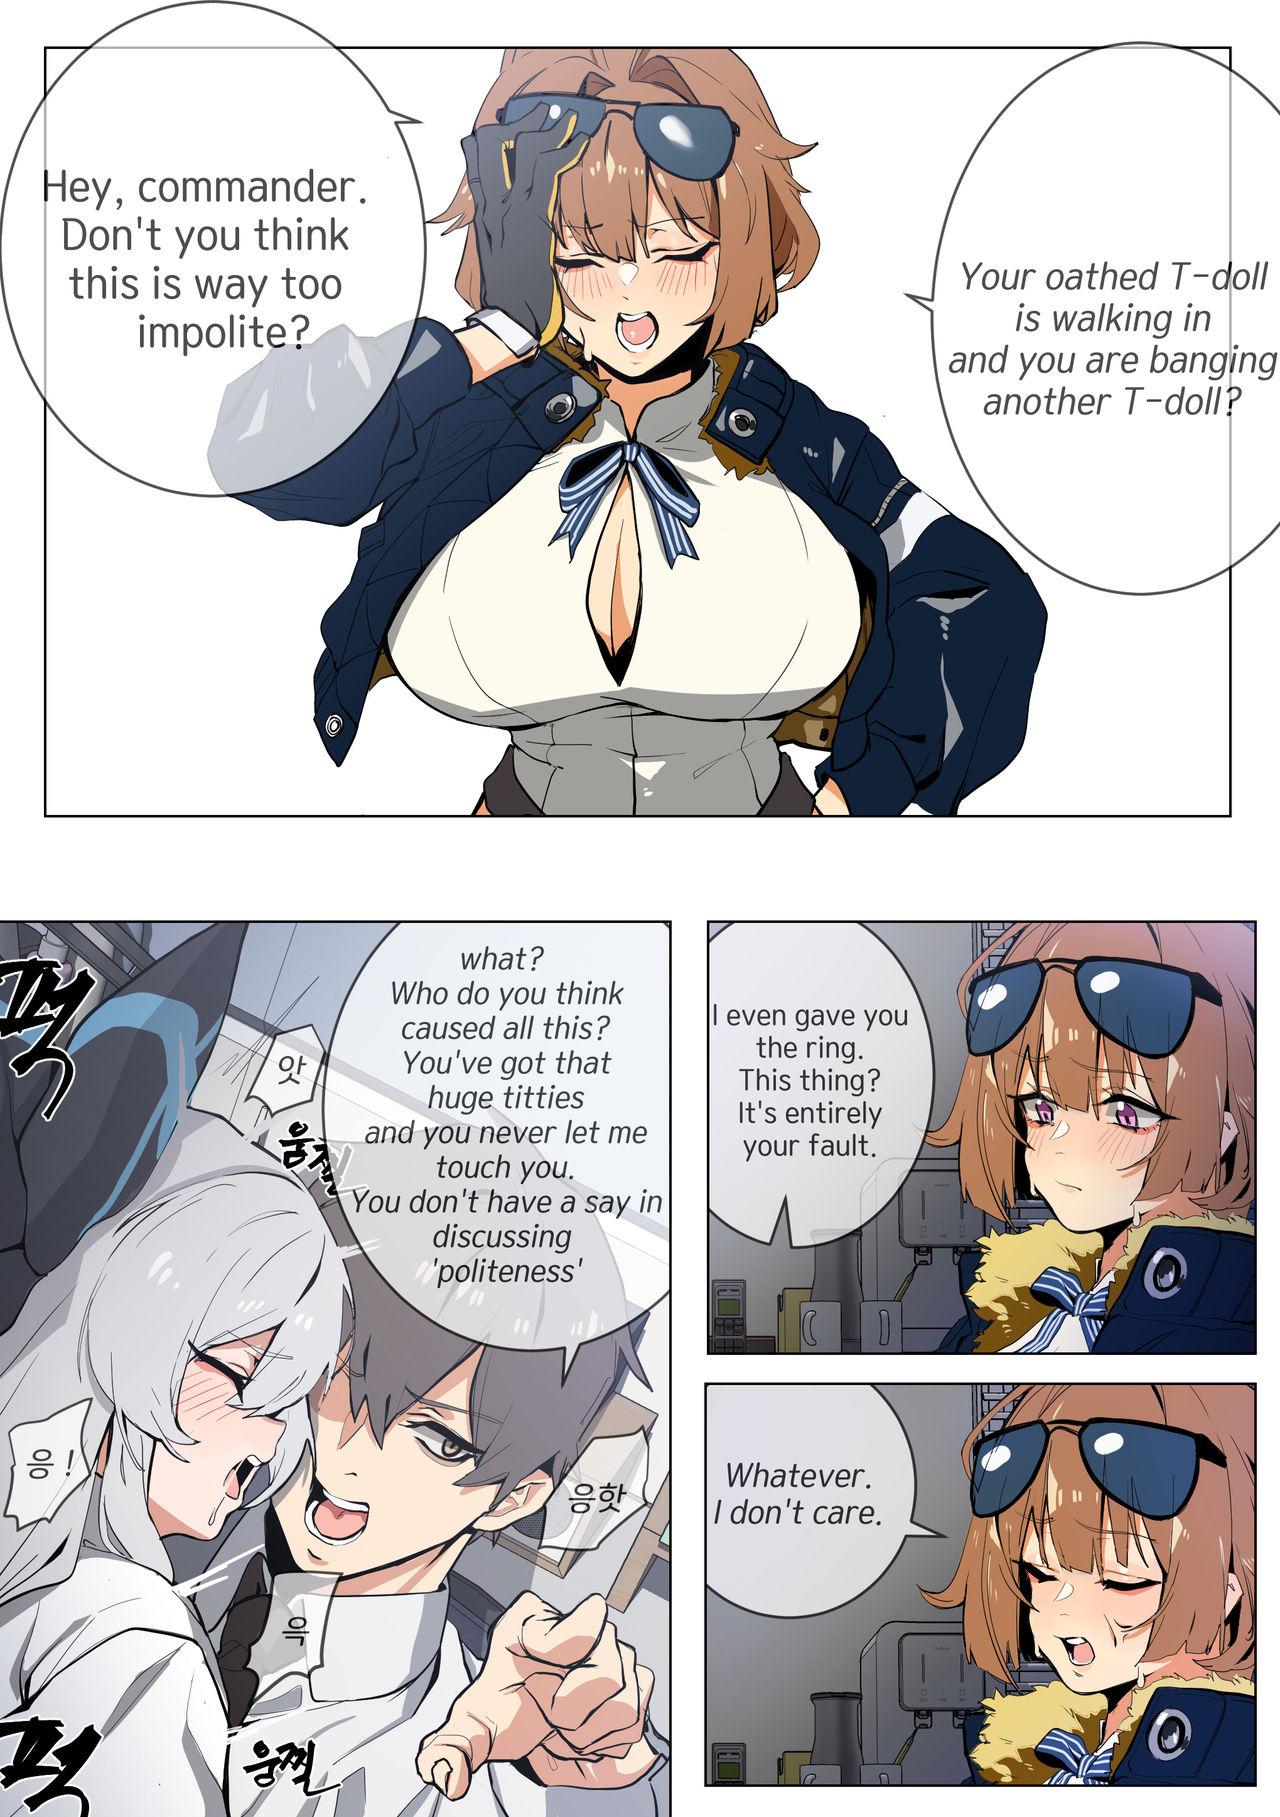 Doctor Grizzly - Girls frontline From - Page 3